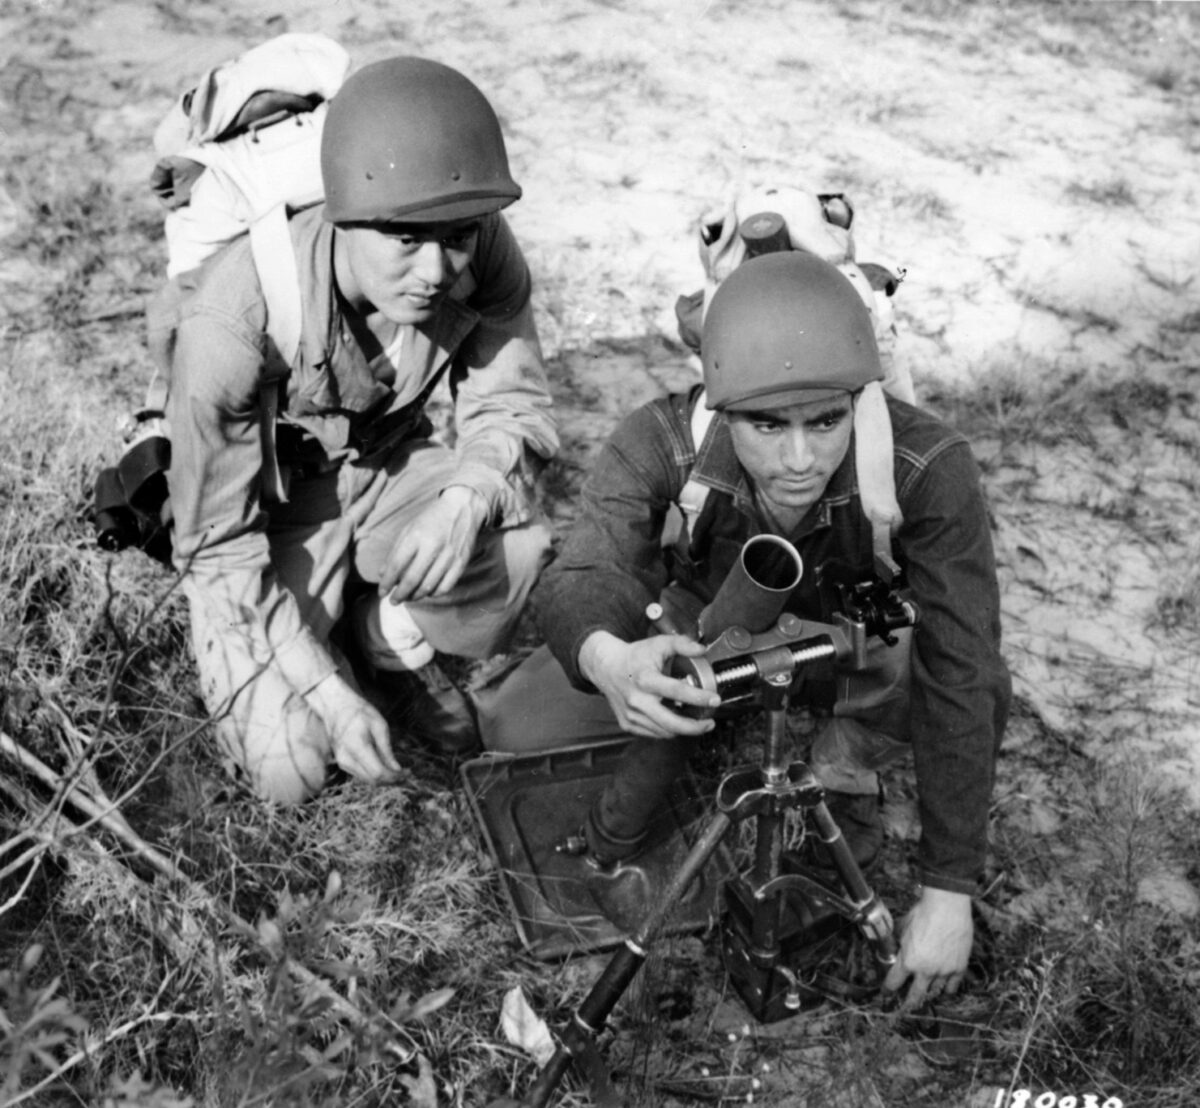 Robert Shimada and Jinichi Miyashiro, members of the 100th Infantry Battalion, set up a 60mm mortar during stateside training at Camp Shelby, Mississippi, in 1943. 